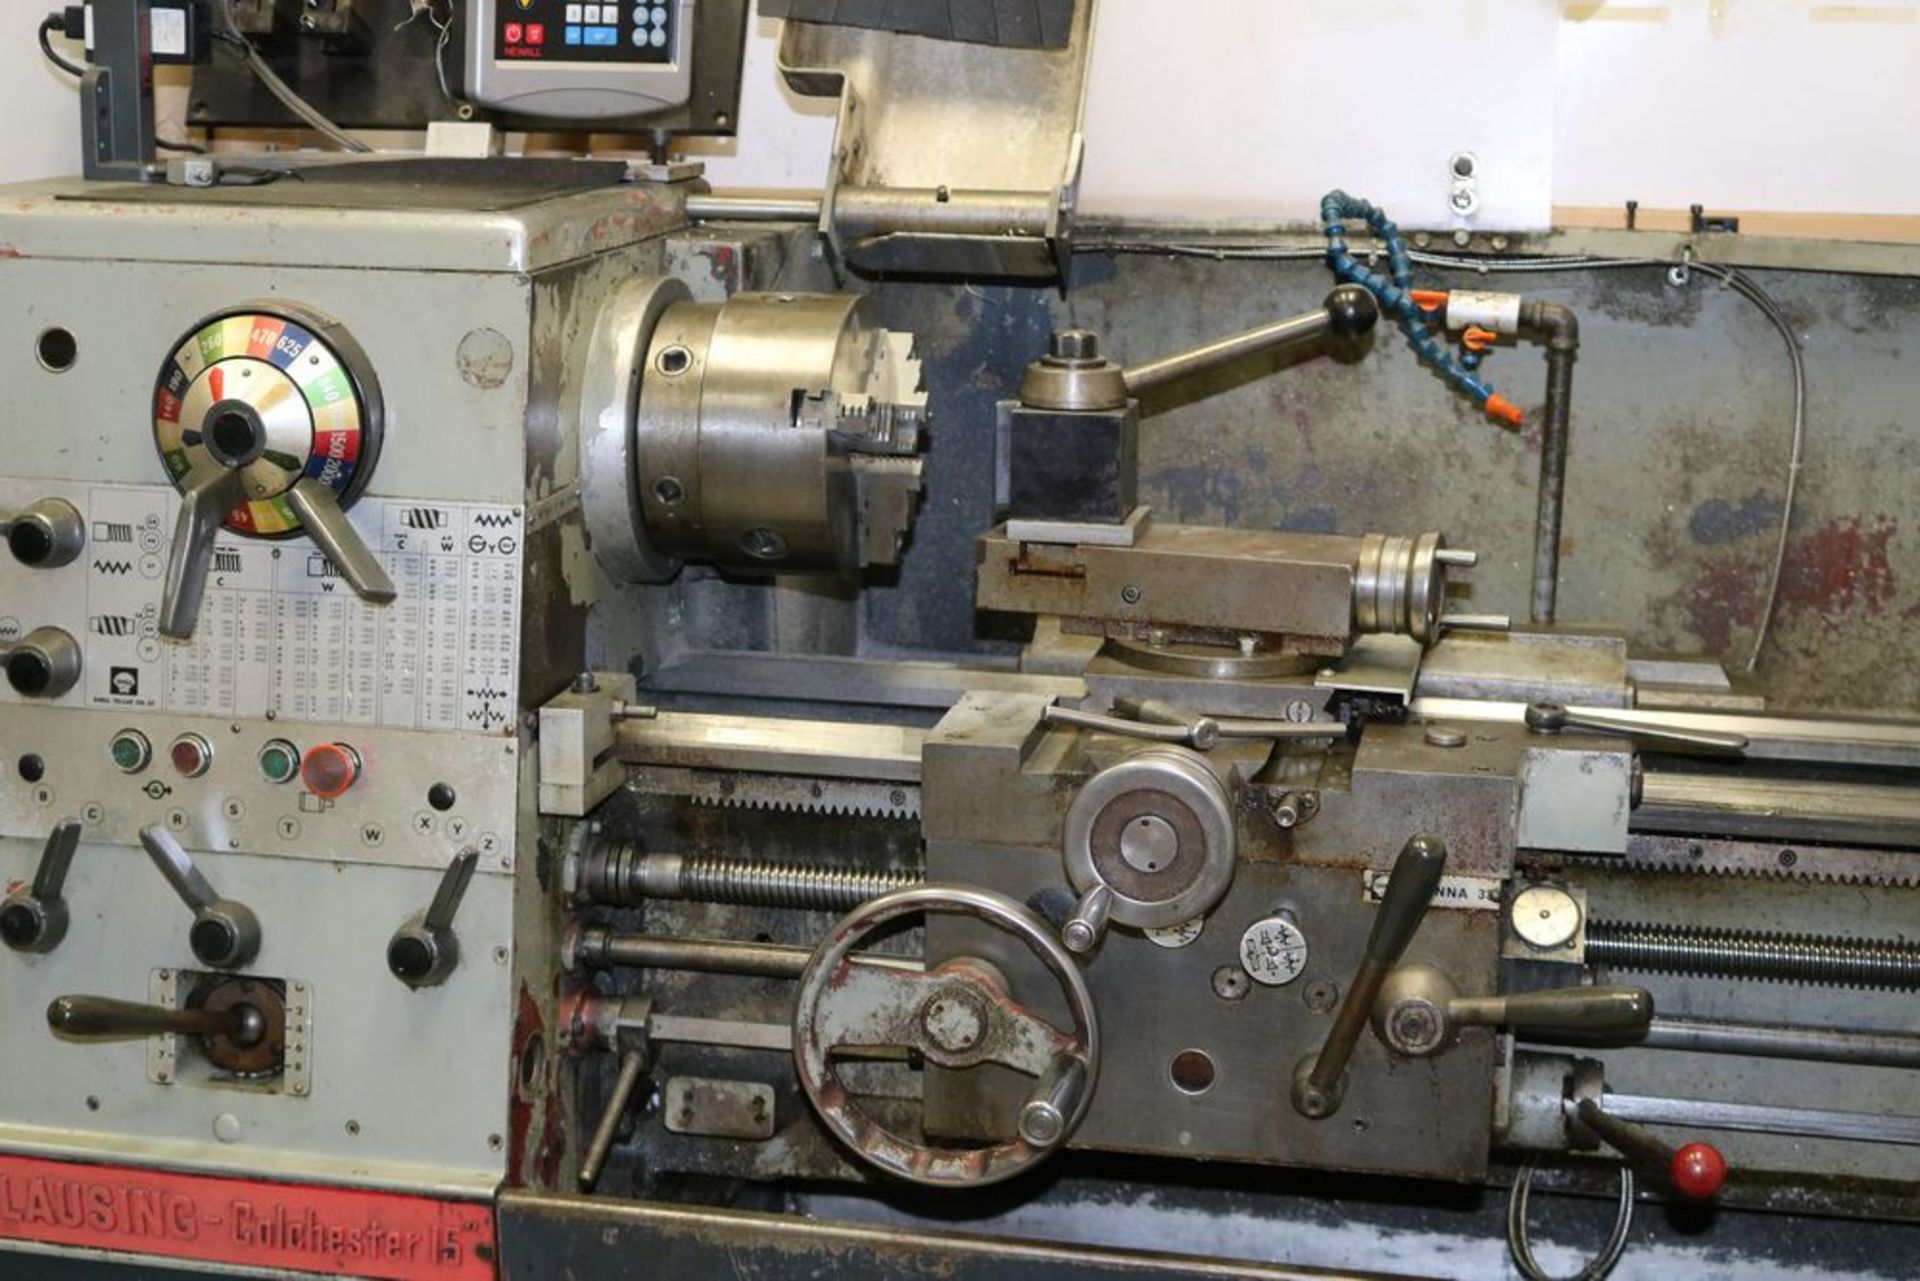 1987 Clausing Colchester - Engine Lathe - Image 3 of 12